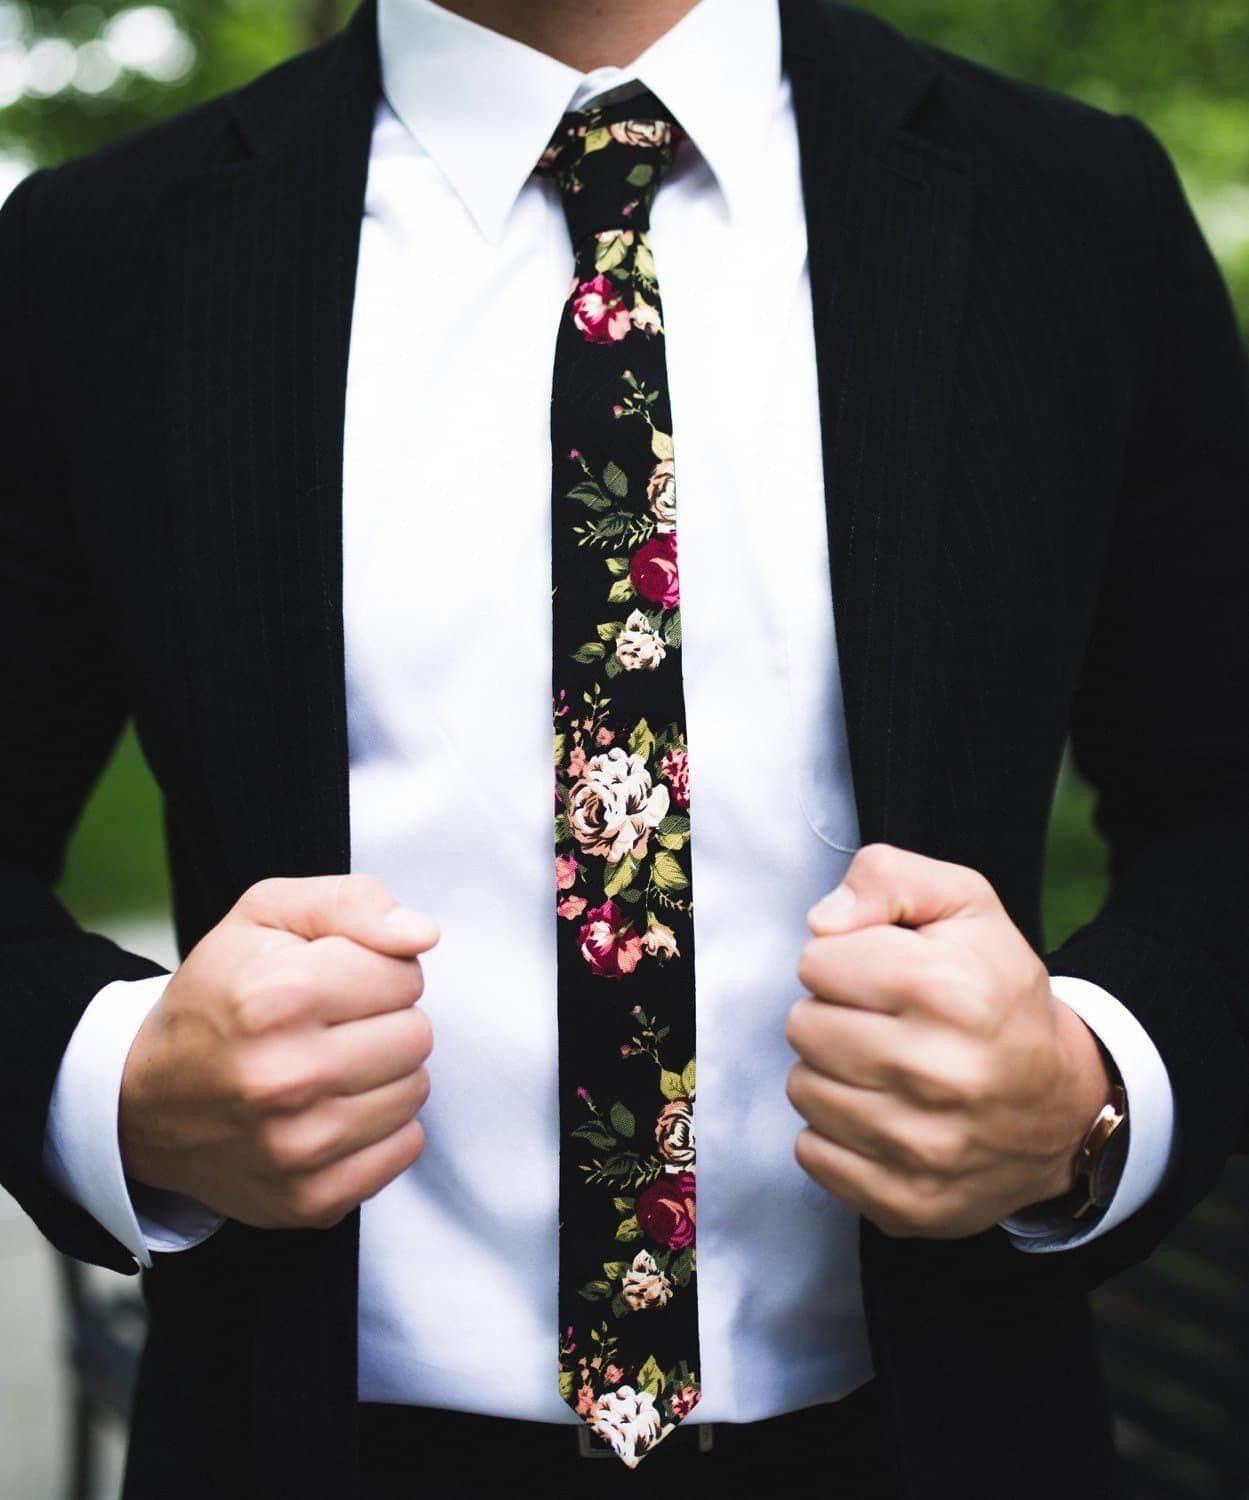 JAKE Floral Skinny Tie 2&quot; (Linen) Black Floral Tie Mytieshop-Neckties-Black Floral tie for weddings and groomsmen groom. Black and pink floral print necktie skinny ties for men Linen tie. Flower ties ties burgundy floral print-Mytieshop. Skinny ties for weddings anniversaries. Father of bride. Groomsmen. Cool skinny neckties for men. Neckwear for prom, missions and fancy events. Gift ideas for men. Anniversaries ideas. Wedding aesthetics. Flower ties. Dry flower ties.